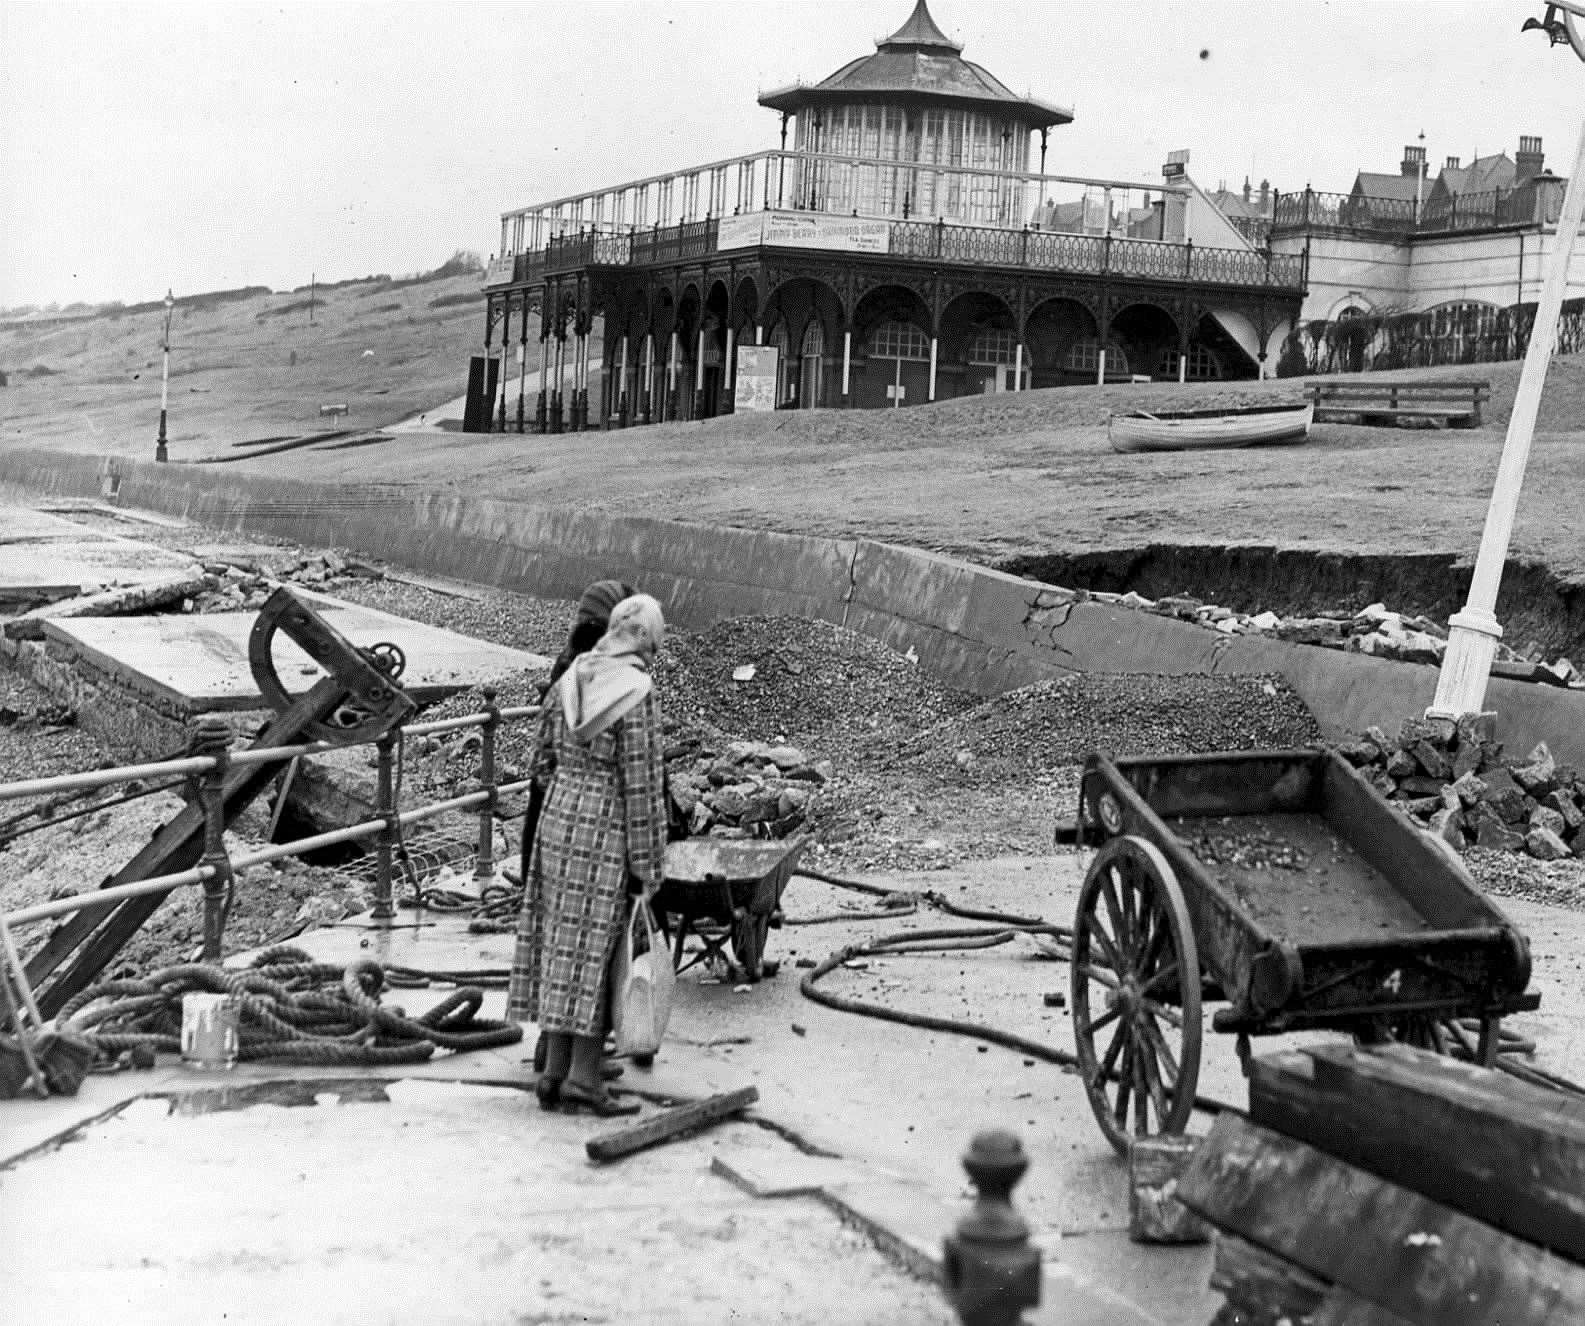 The aftermath of the flood at Herne Bay